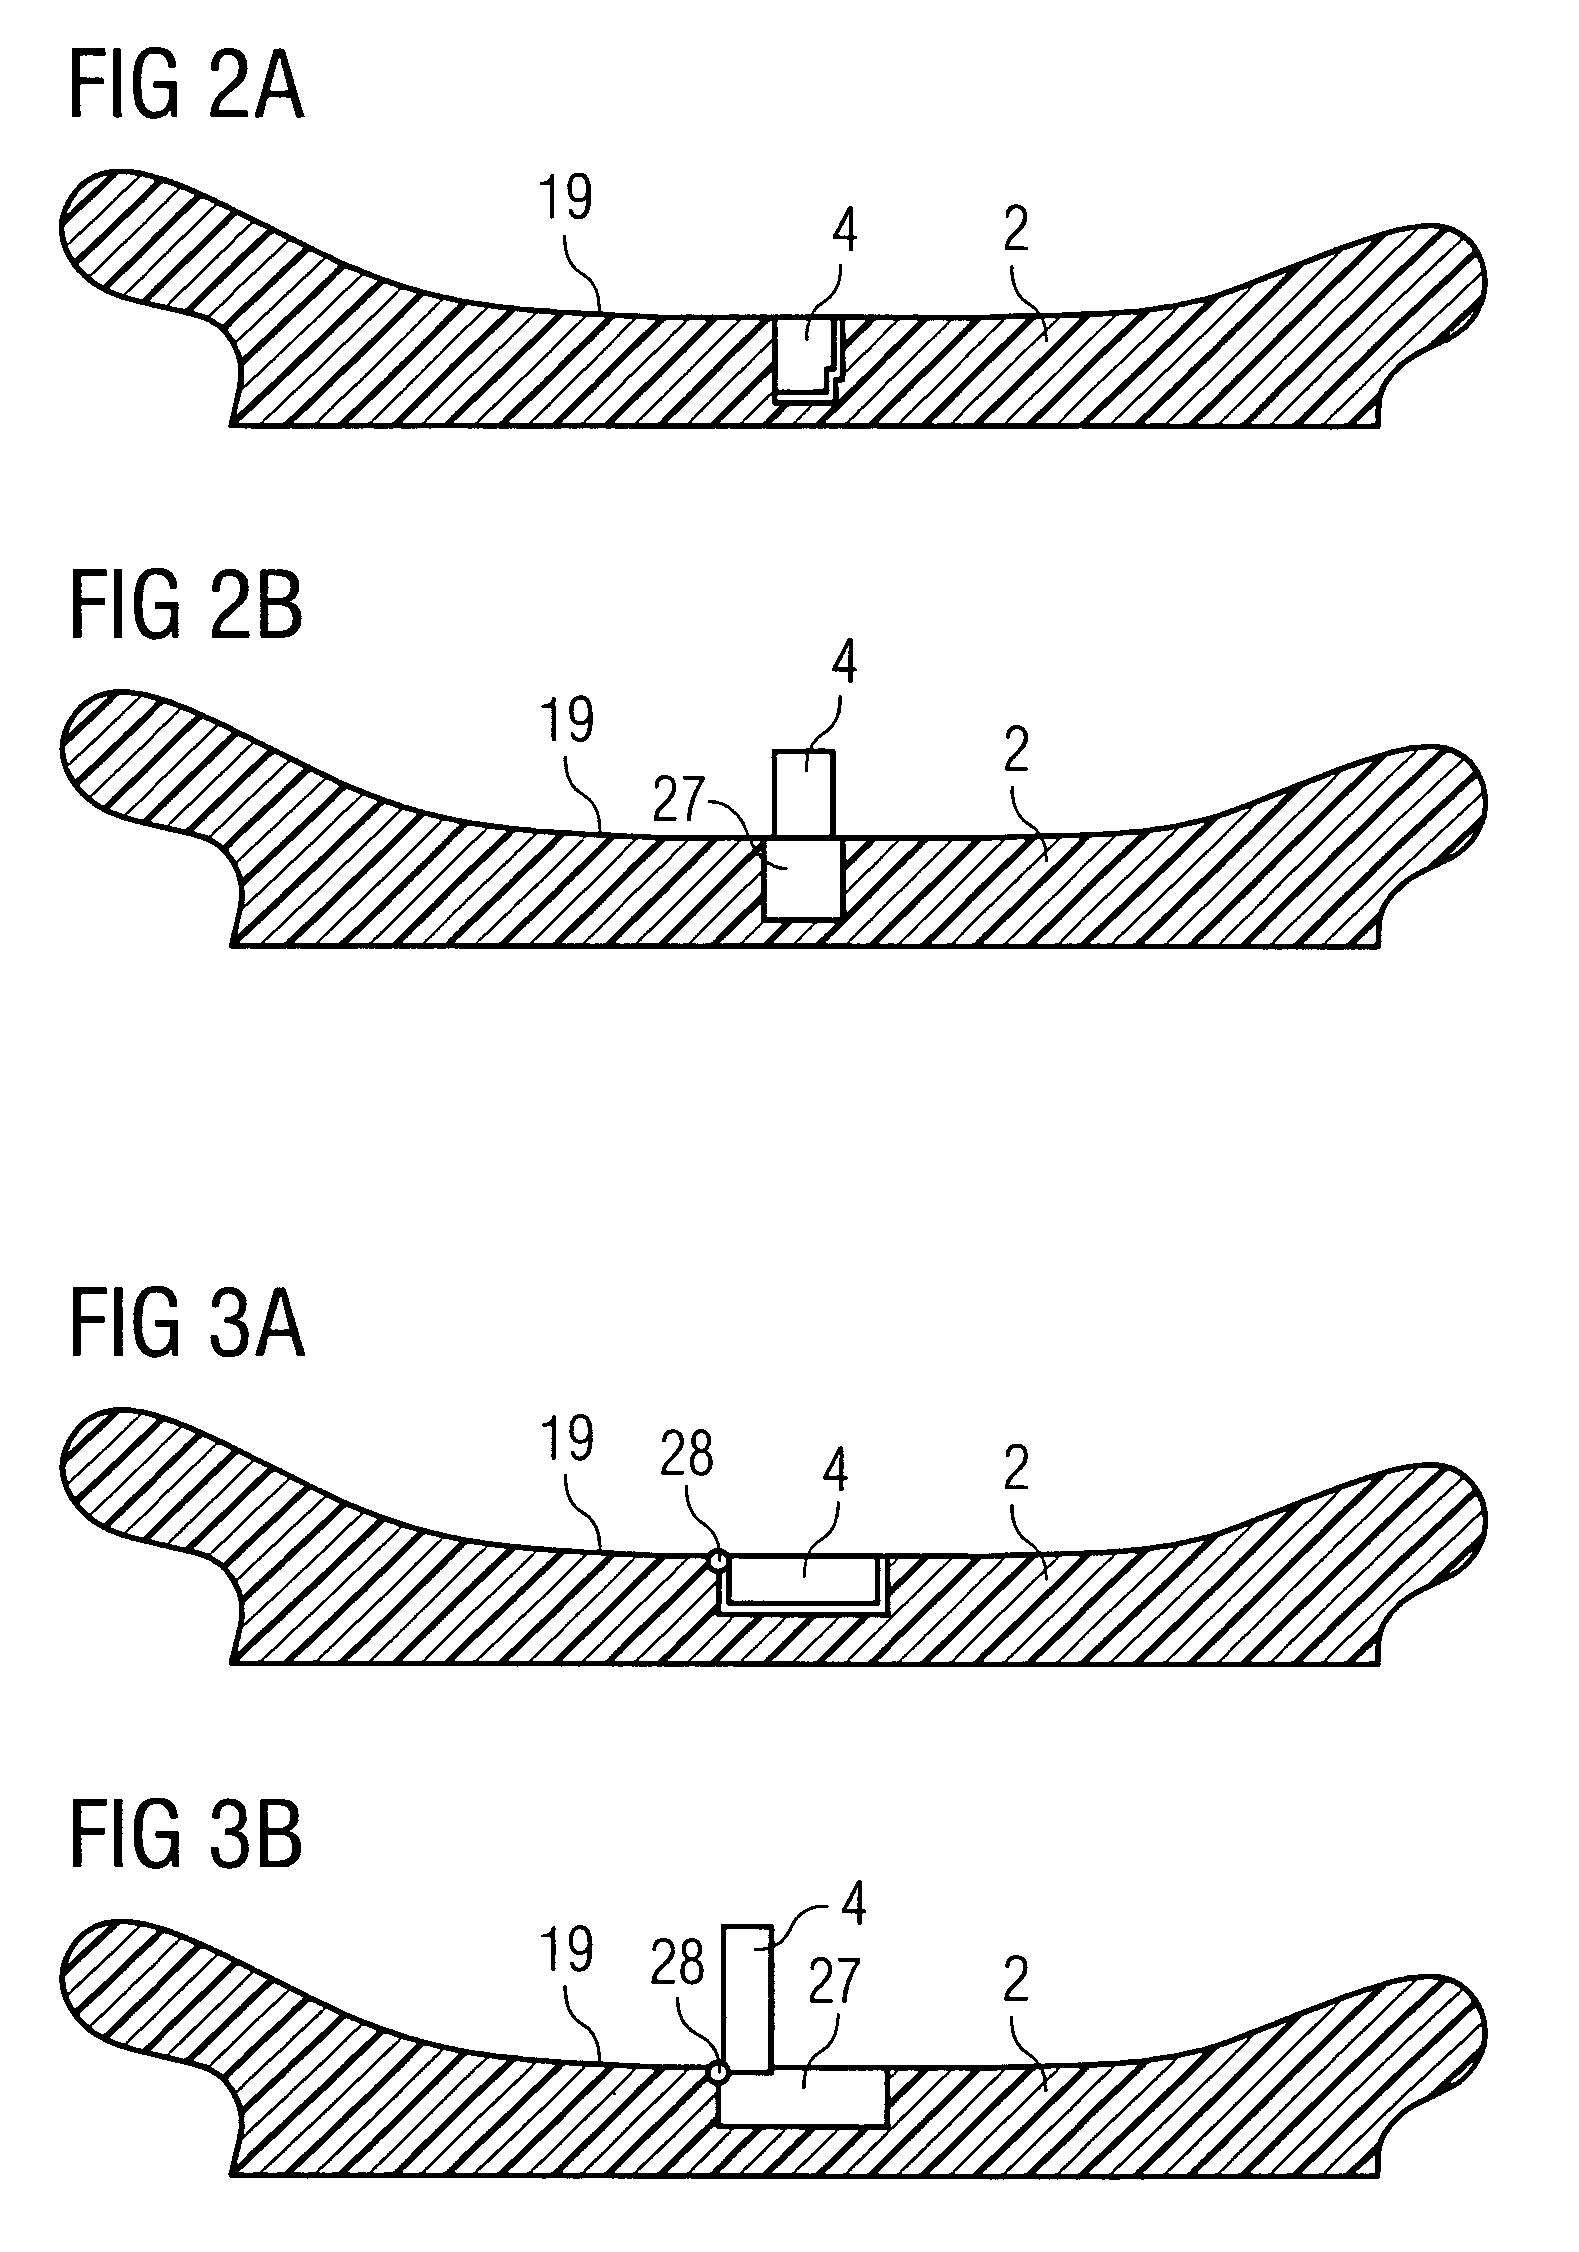 Hearing device with a contact unit and an associated external unit